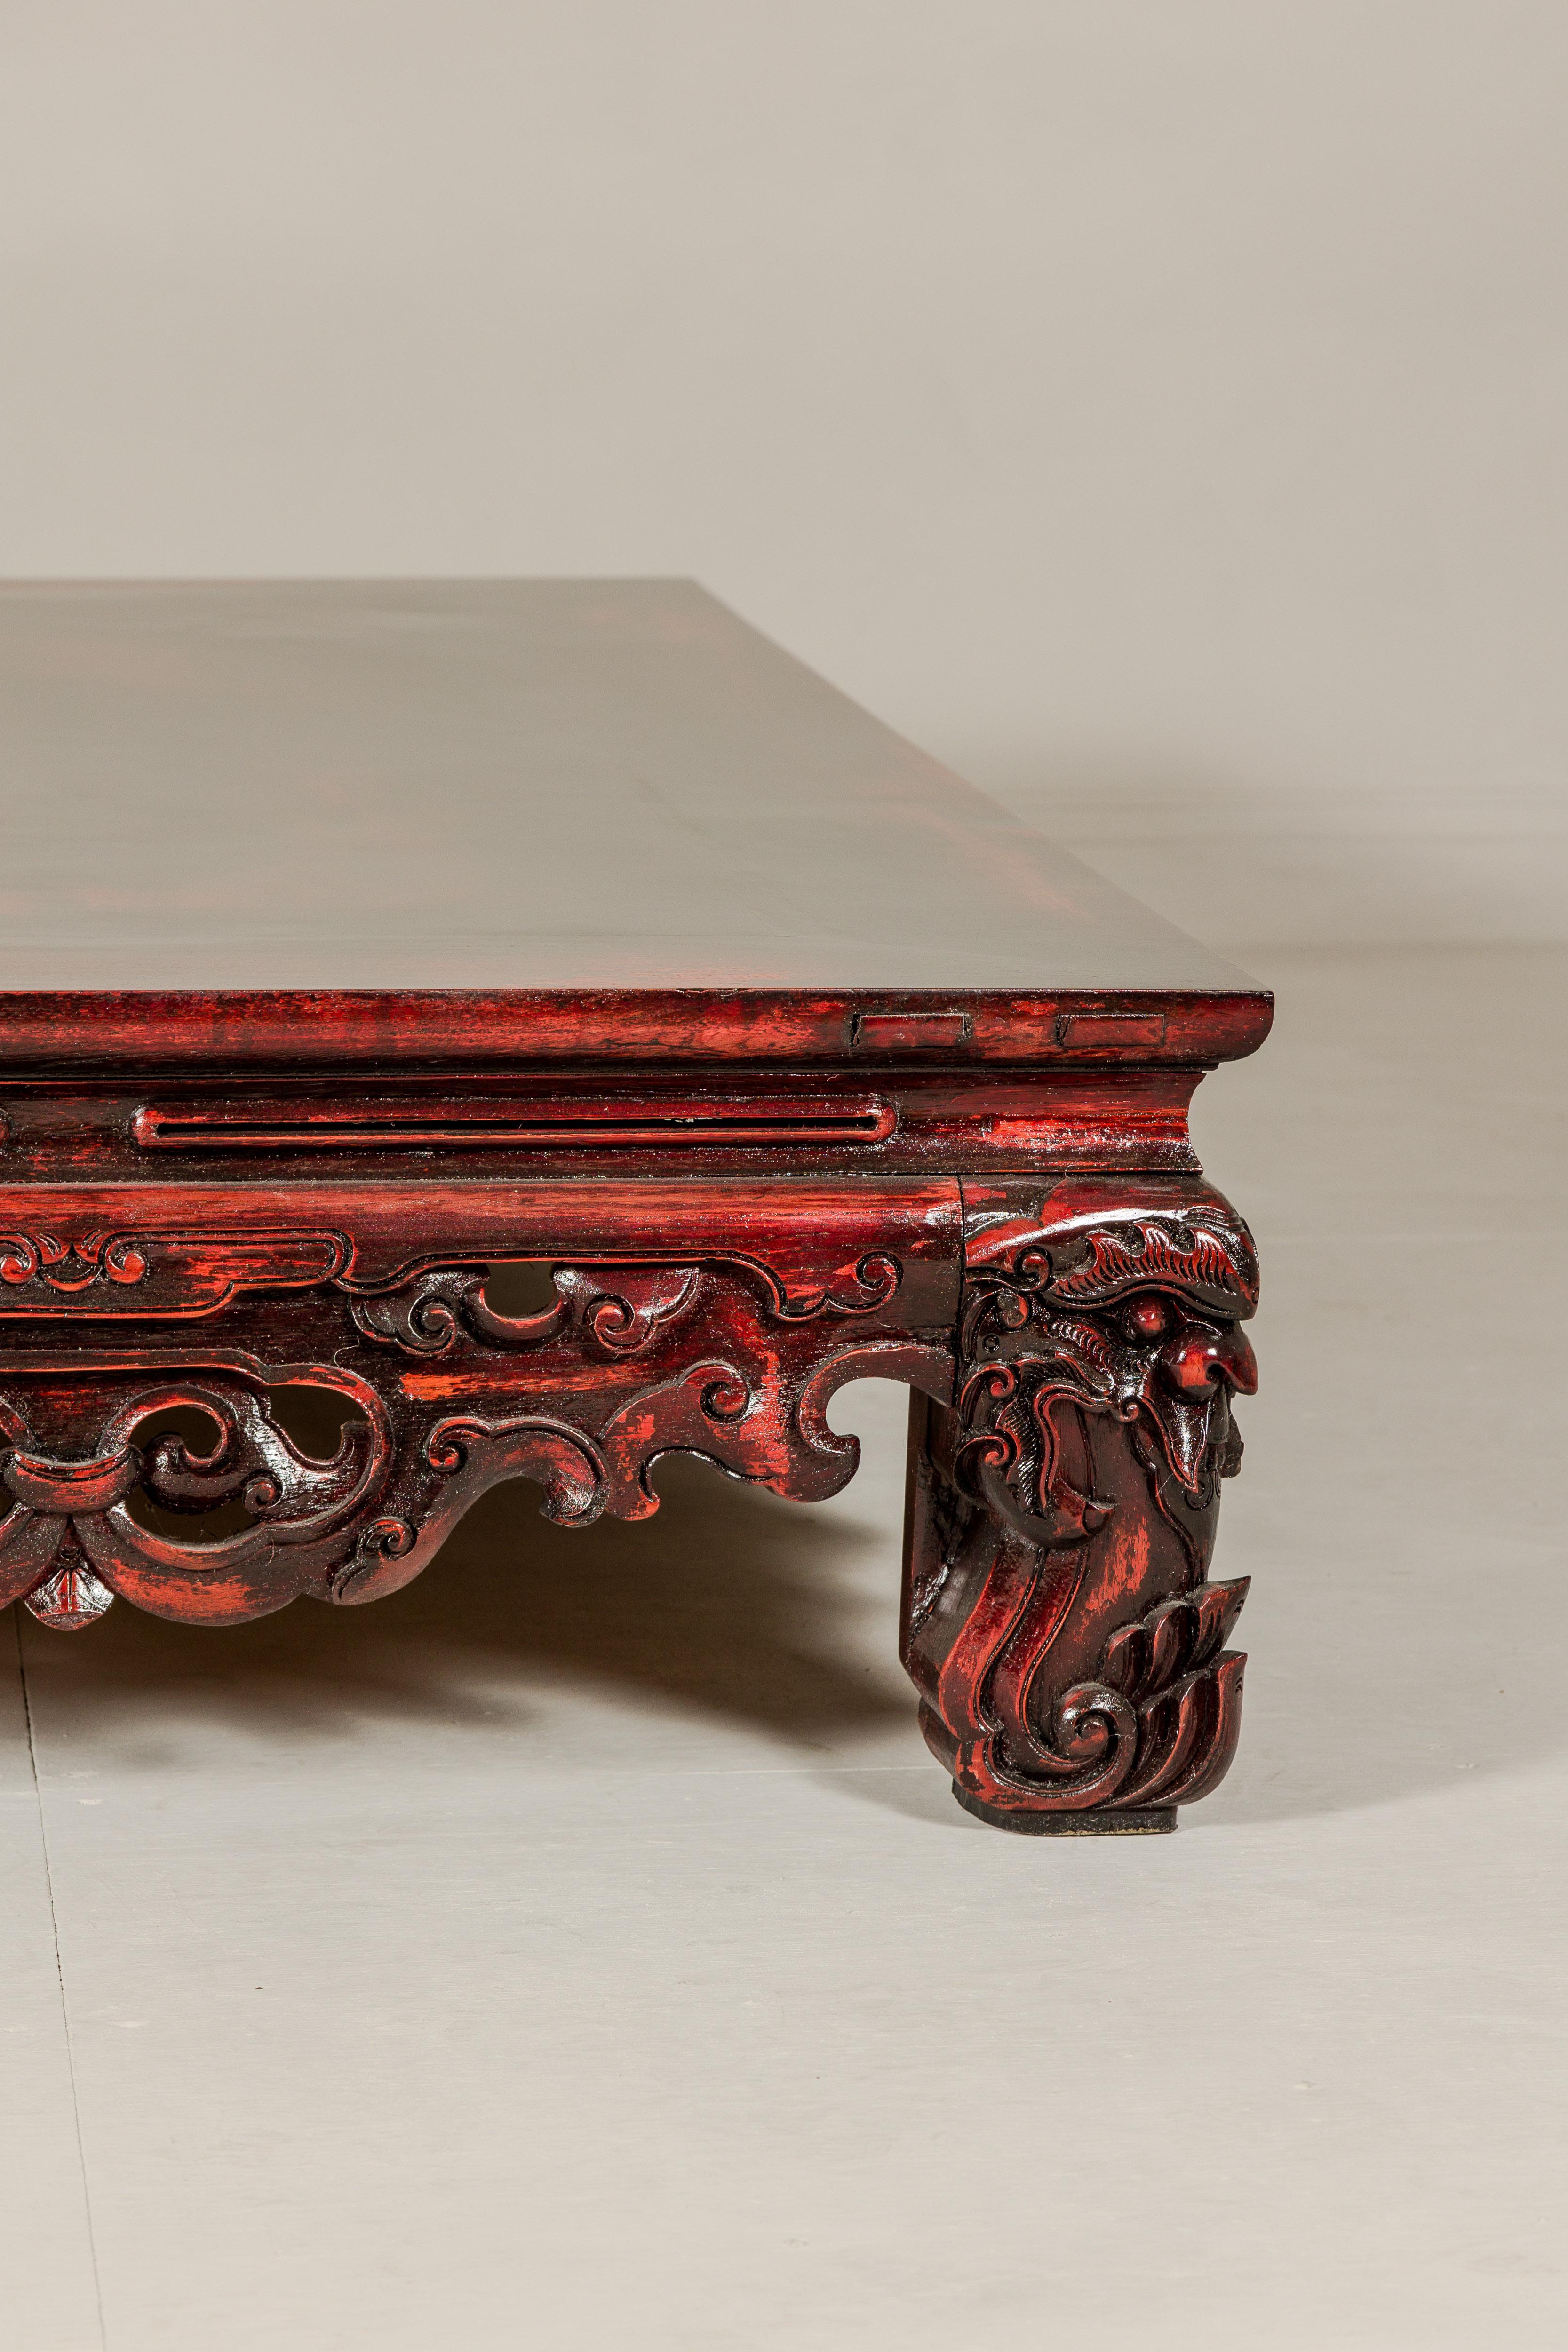 Qing Dynasty Low Kang Coffee Table with Reddish Brown Finish and Carved Décor For Sale 4